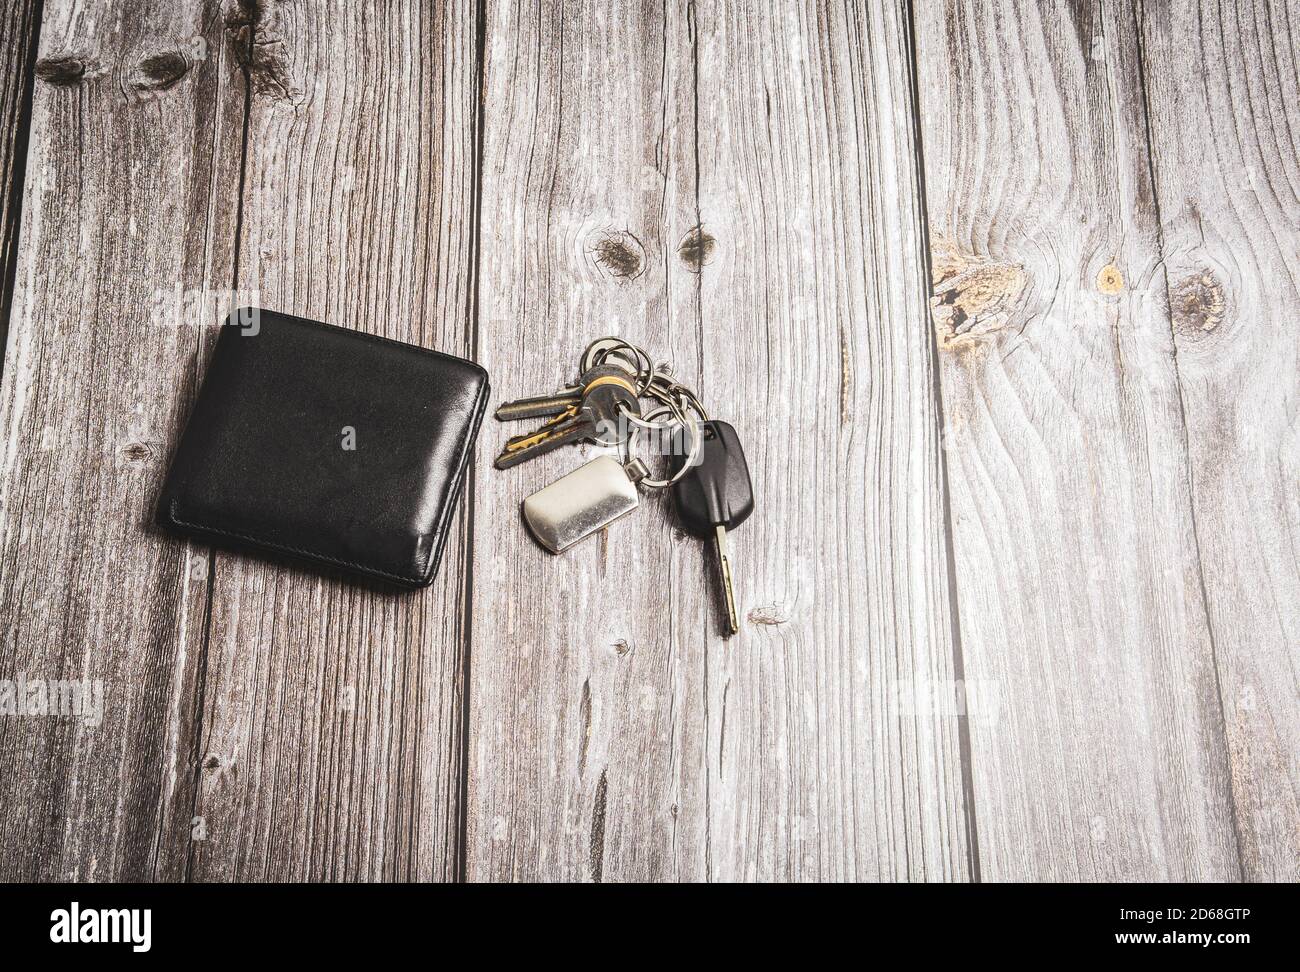 A wallet and a set of keys laid on a rustic wooden table or desk Stock Photo